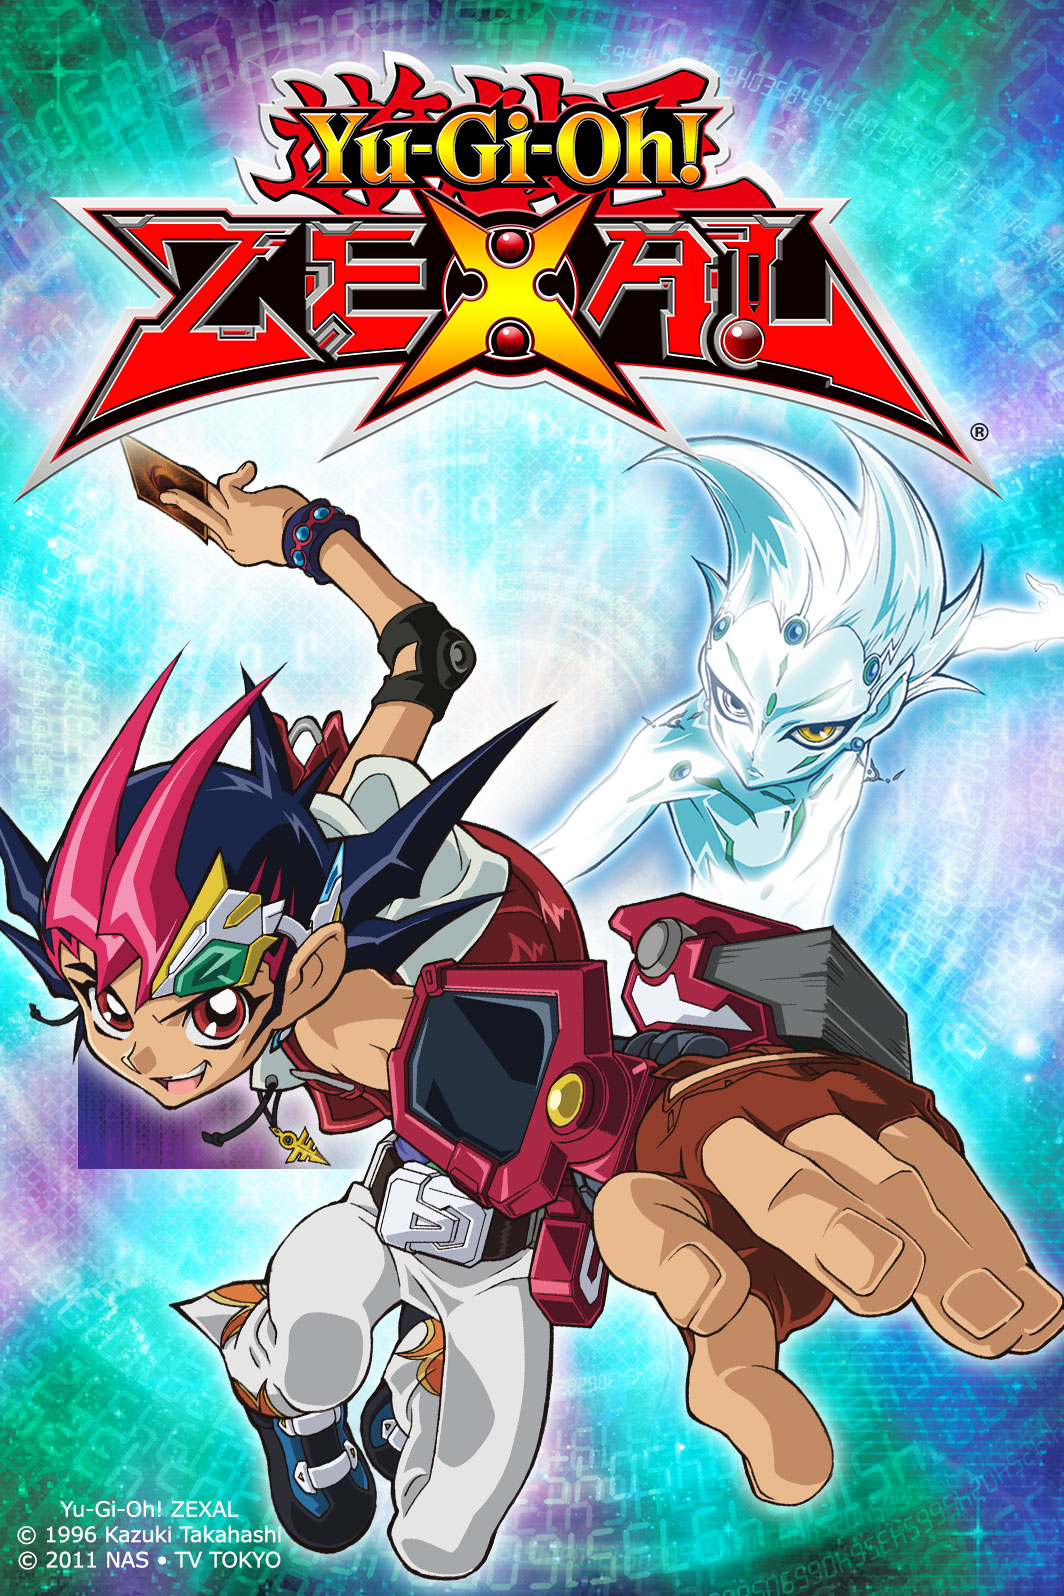 Download this Zexal Doblaje Wiki picture